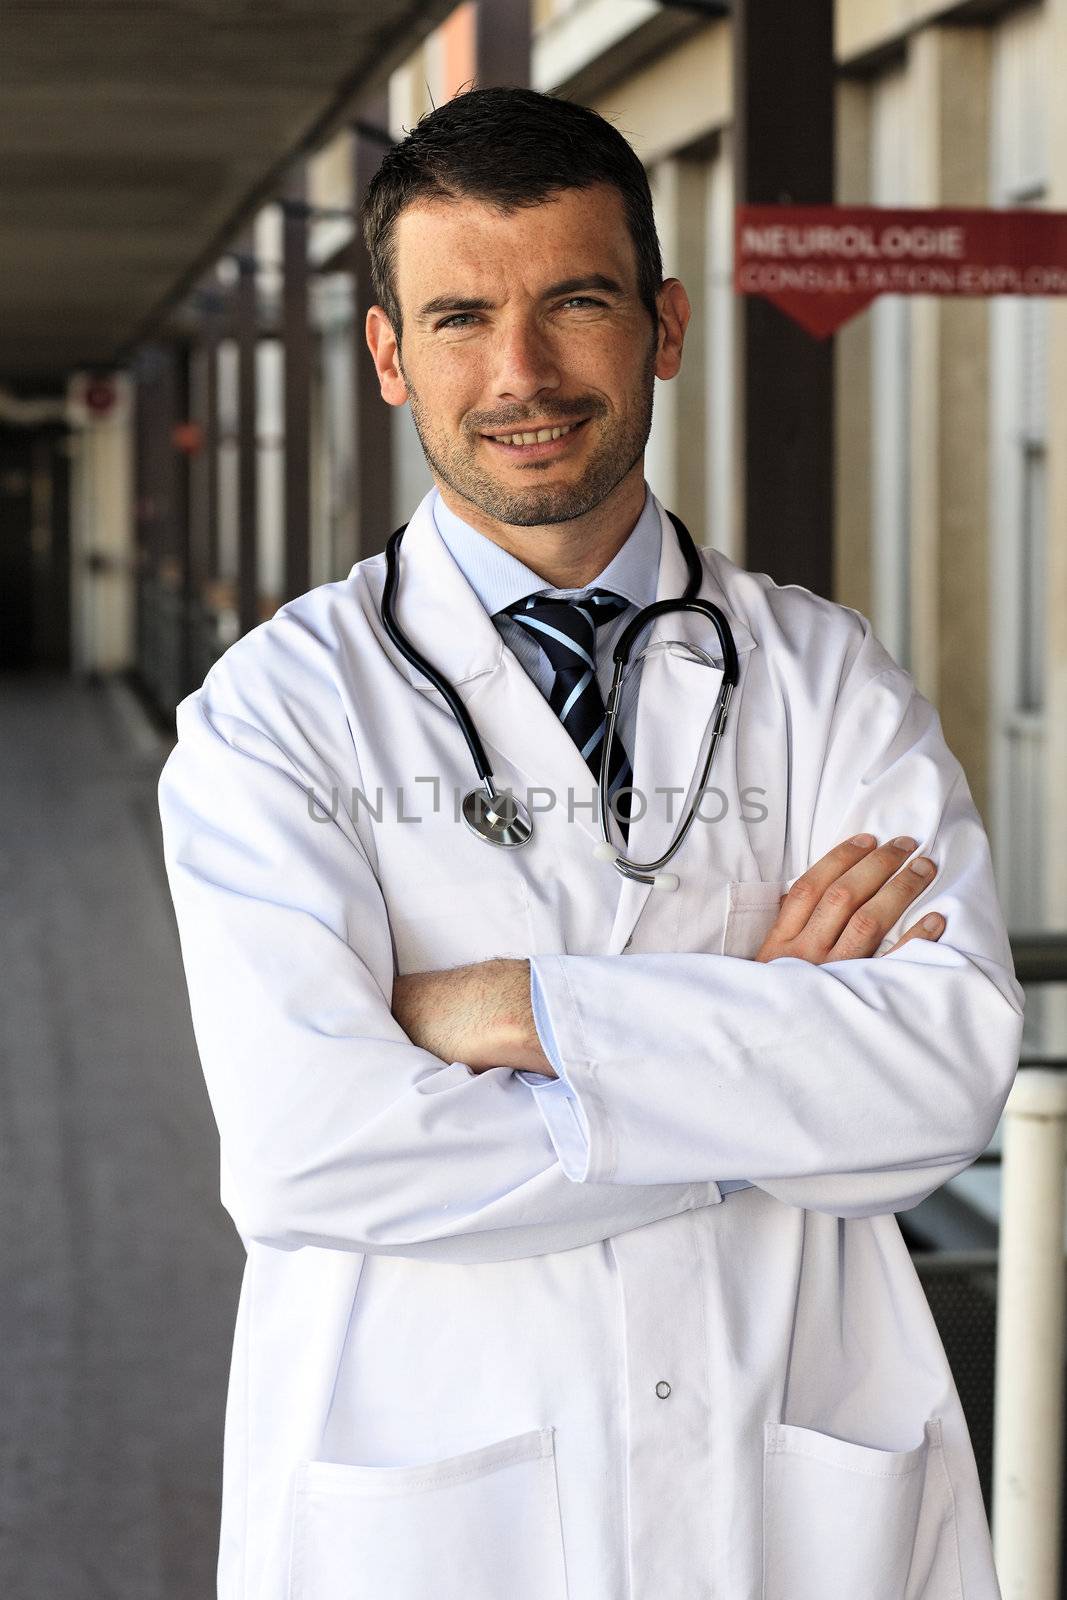 young doctor in front of hospital entry